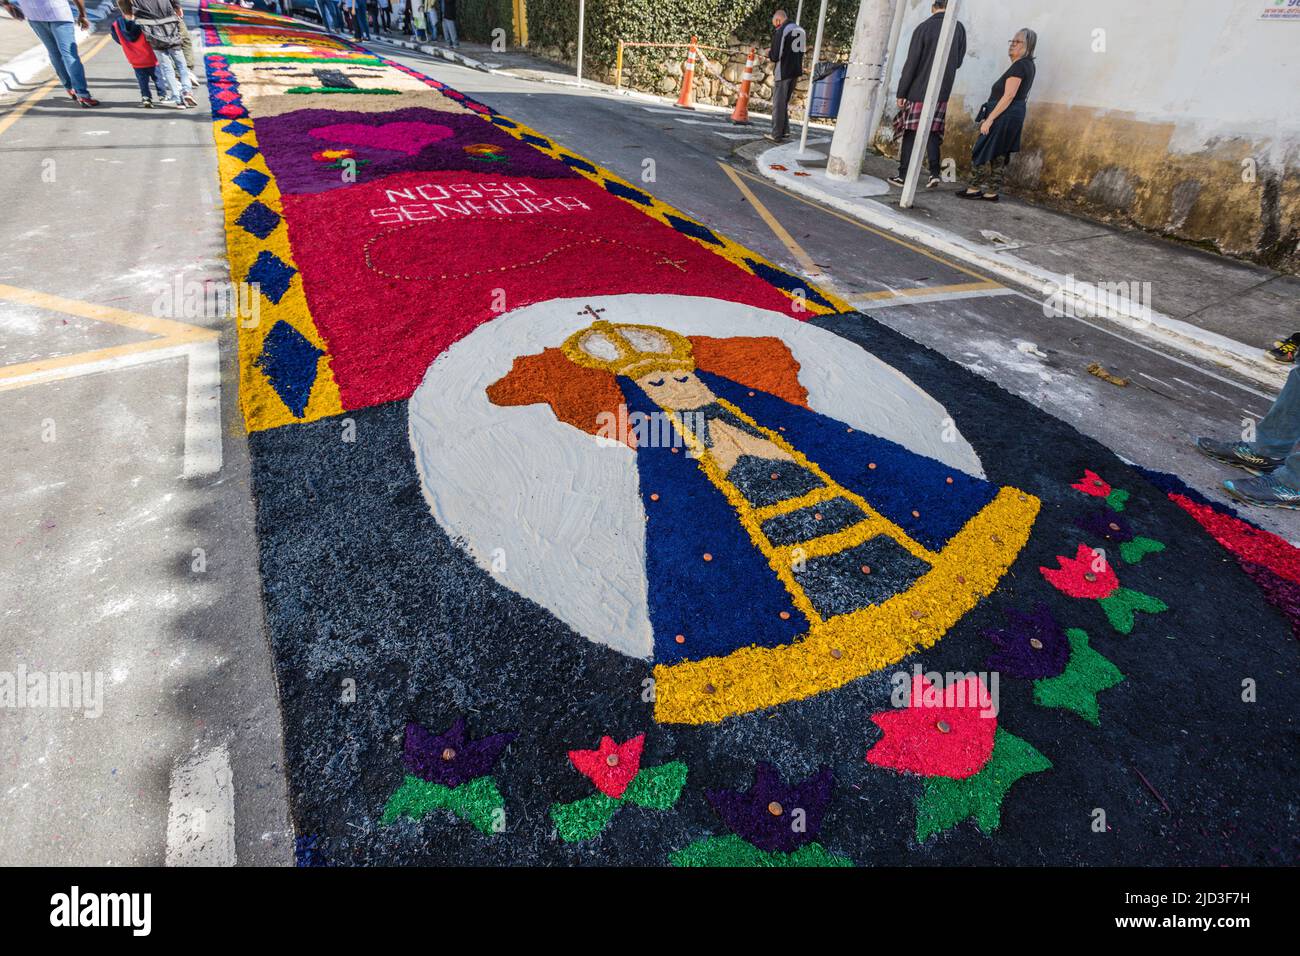 Brazil. 16th June, 2022. Movement of tourists during the traditional assembly of the sawdust mat with images linked to the Catholic church that celebrates the Corpus Christi holiday in the city of Santana de Paranaíba, this Thursday, 16th. (Photo: Vanessa Carvalho/Brazil Photo Press) Credit: Brazil Photo Press/Alamy Live News Credit: Brazil Photo Press/Alamy Live News Stock Photo